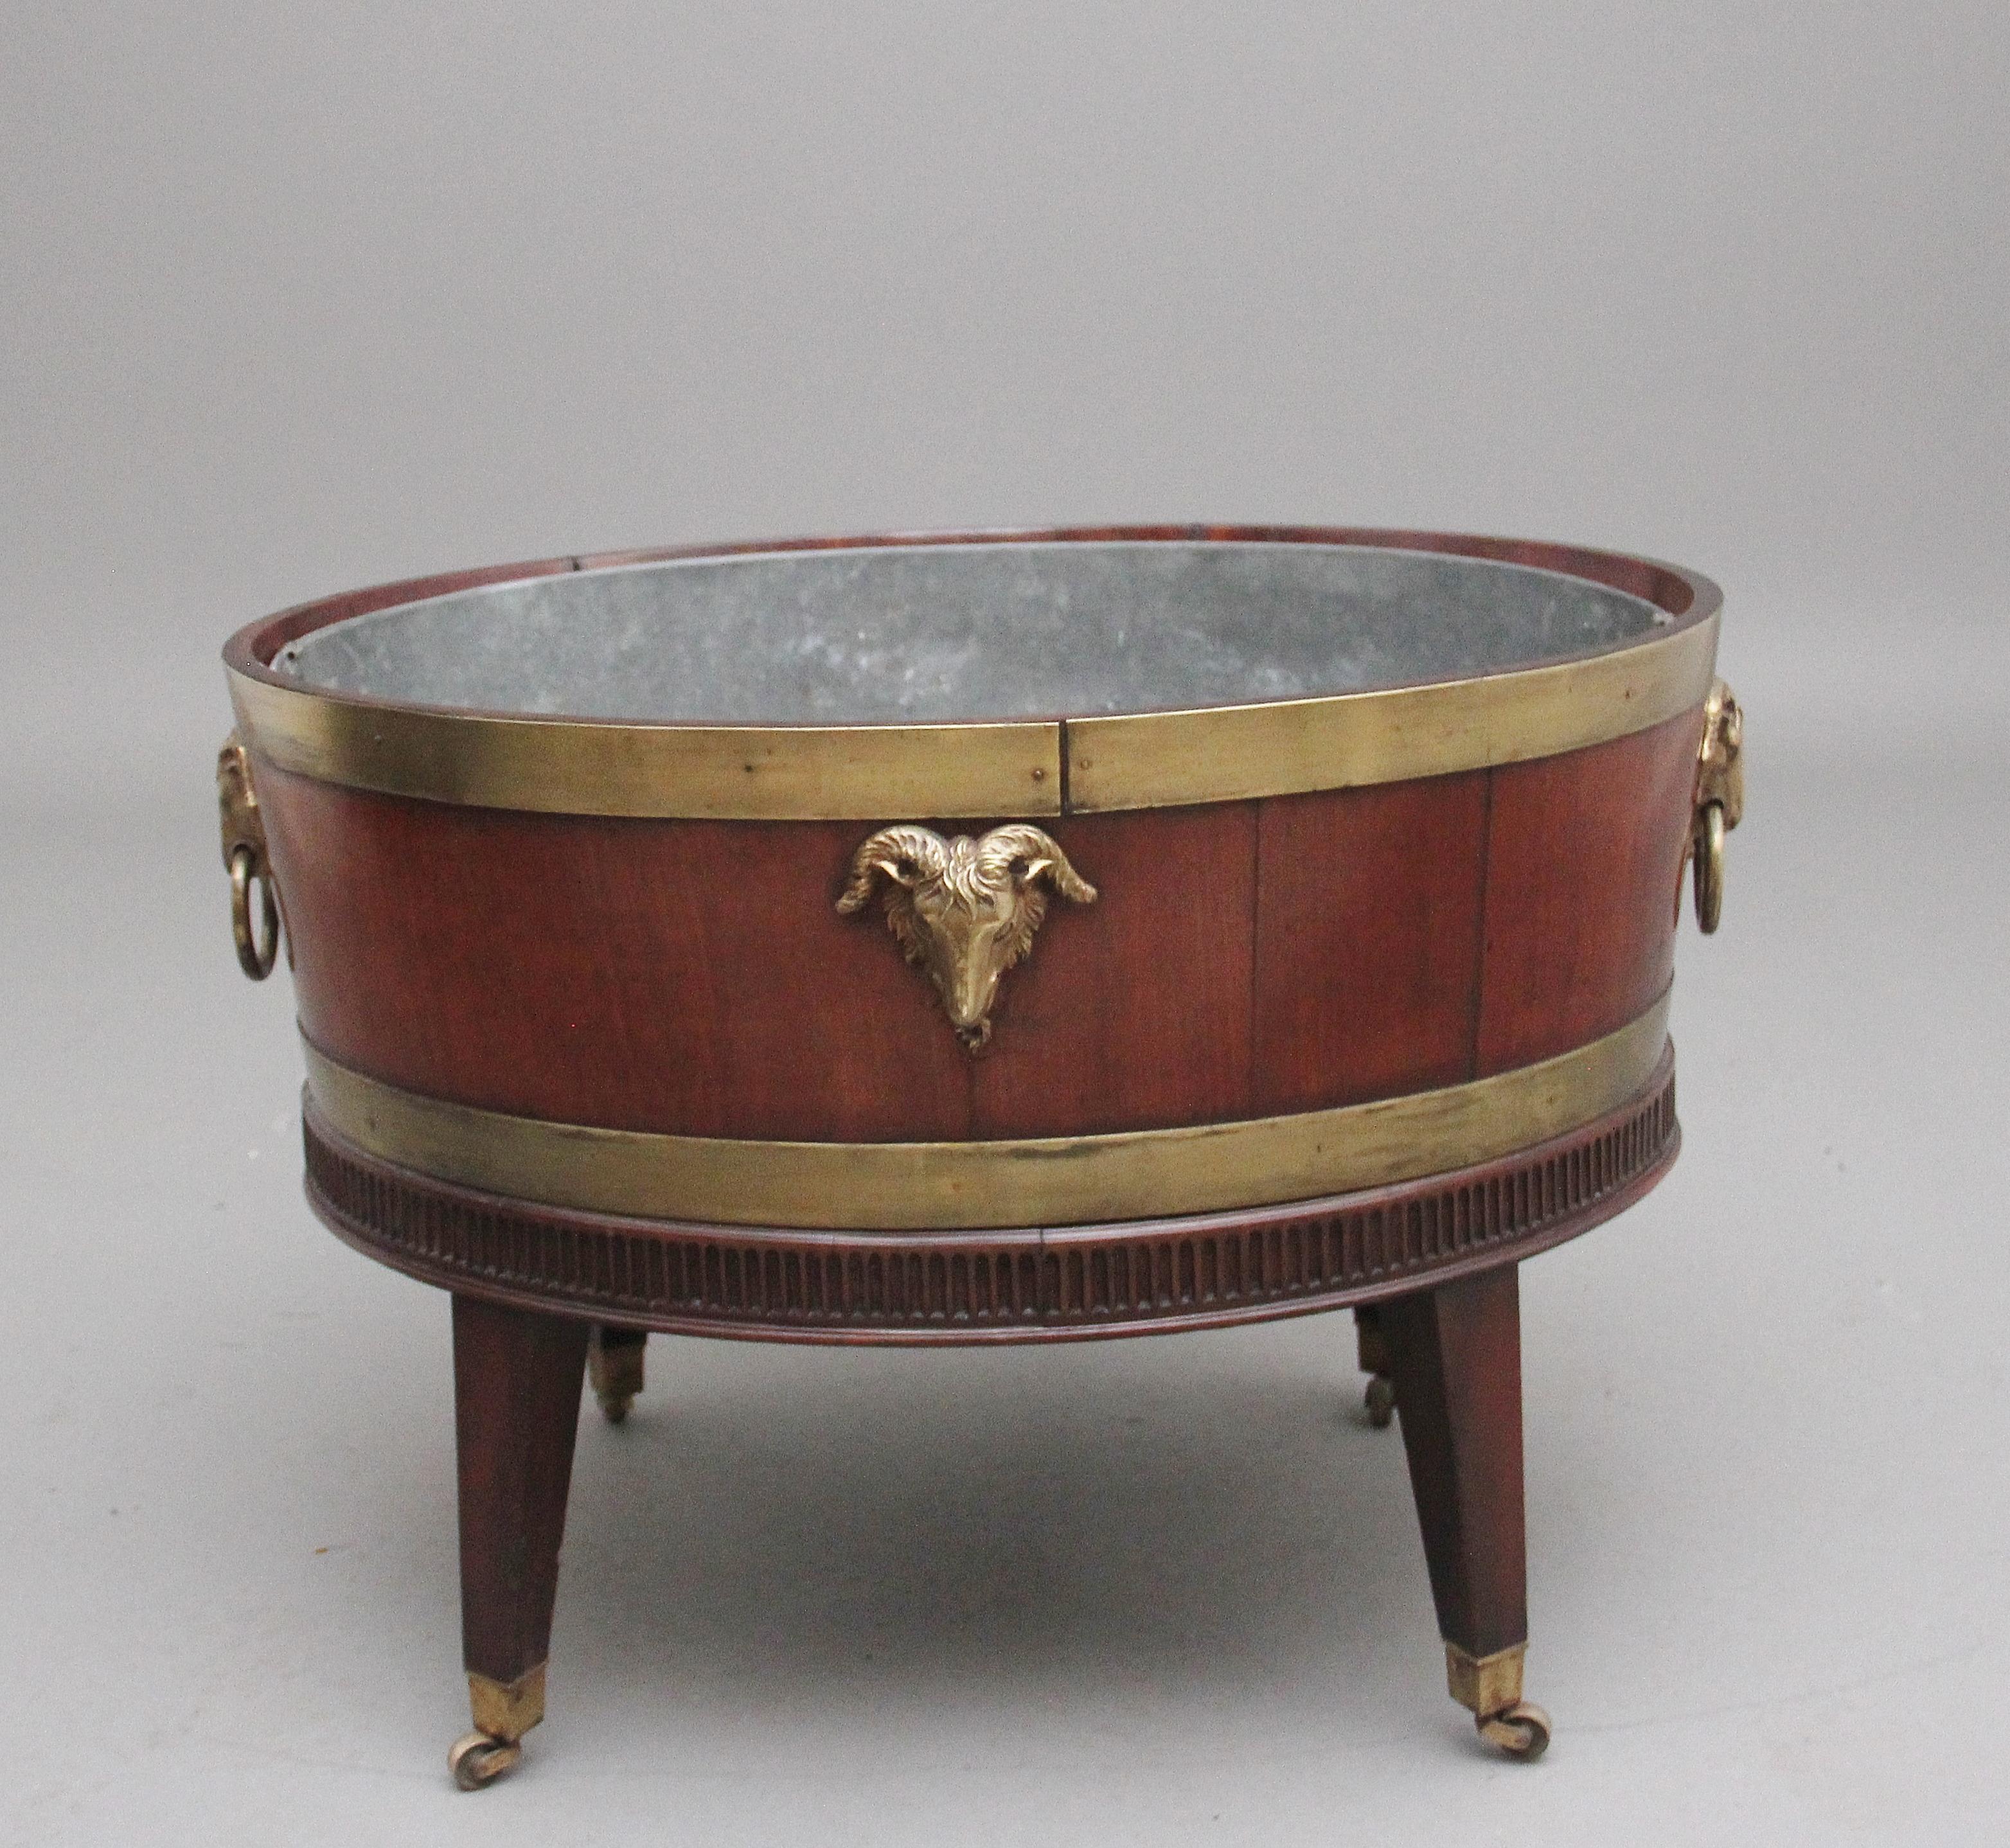 A highly decorative early 19th Century mahogany and brass bound wine cooler of an oval shape, having the original zinc lined interior for storage of various alcoholic beverages, having brass straps at the top and bottom, the sides and ends of the